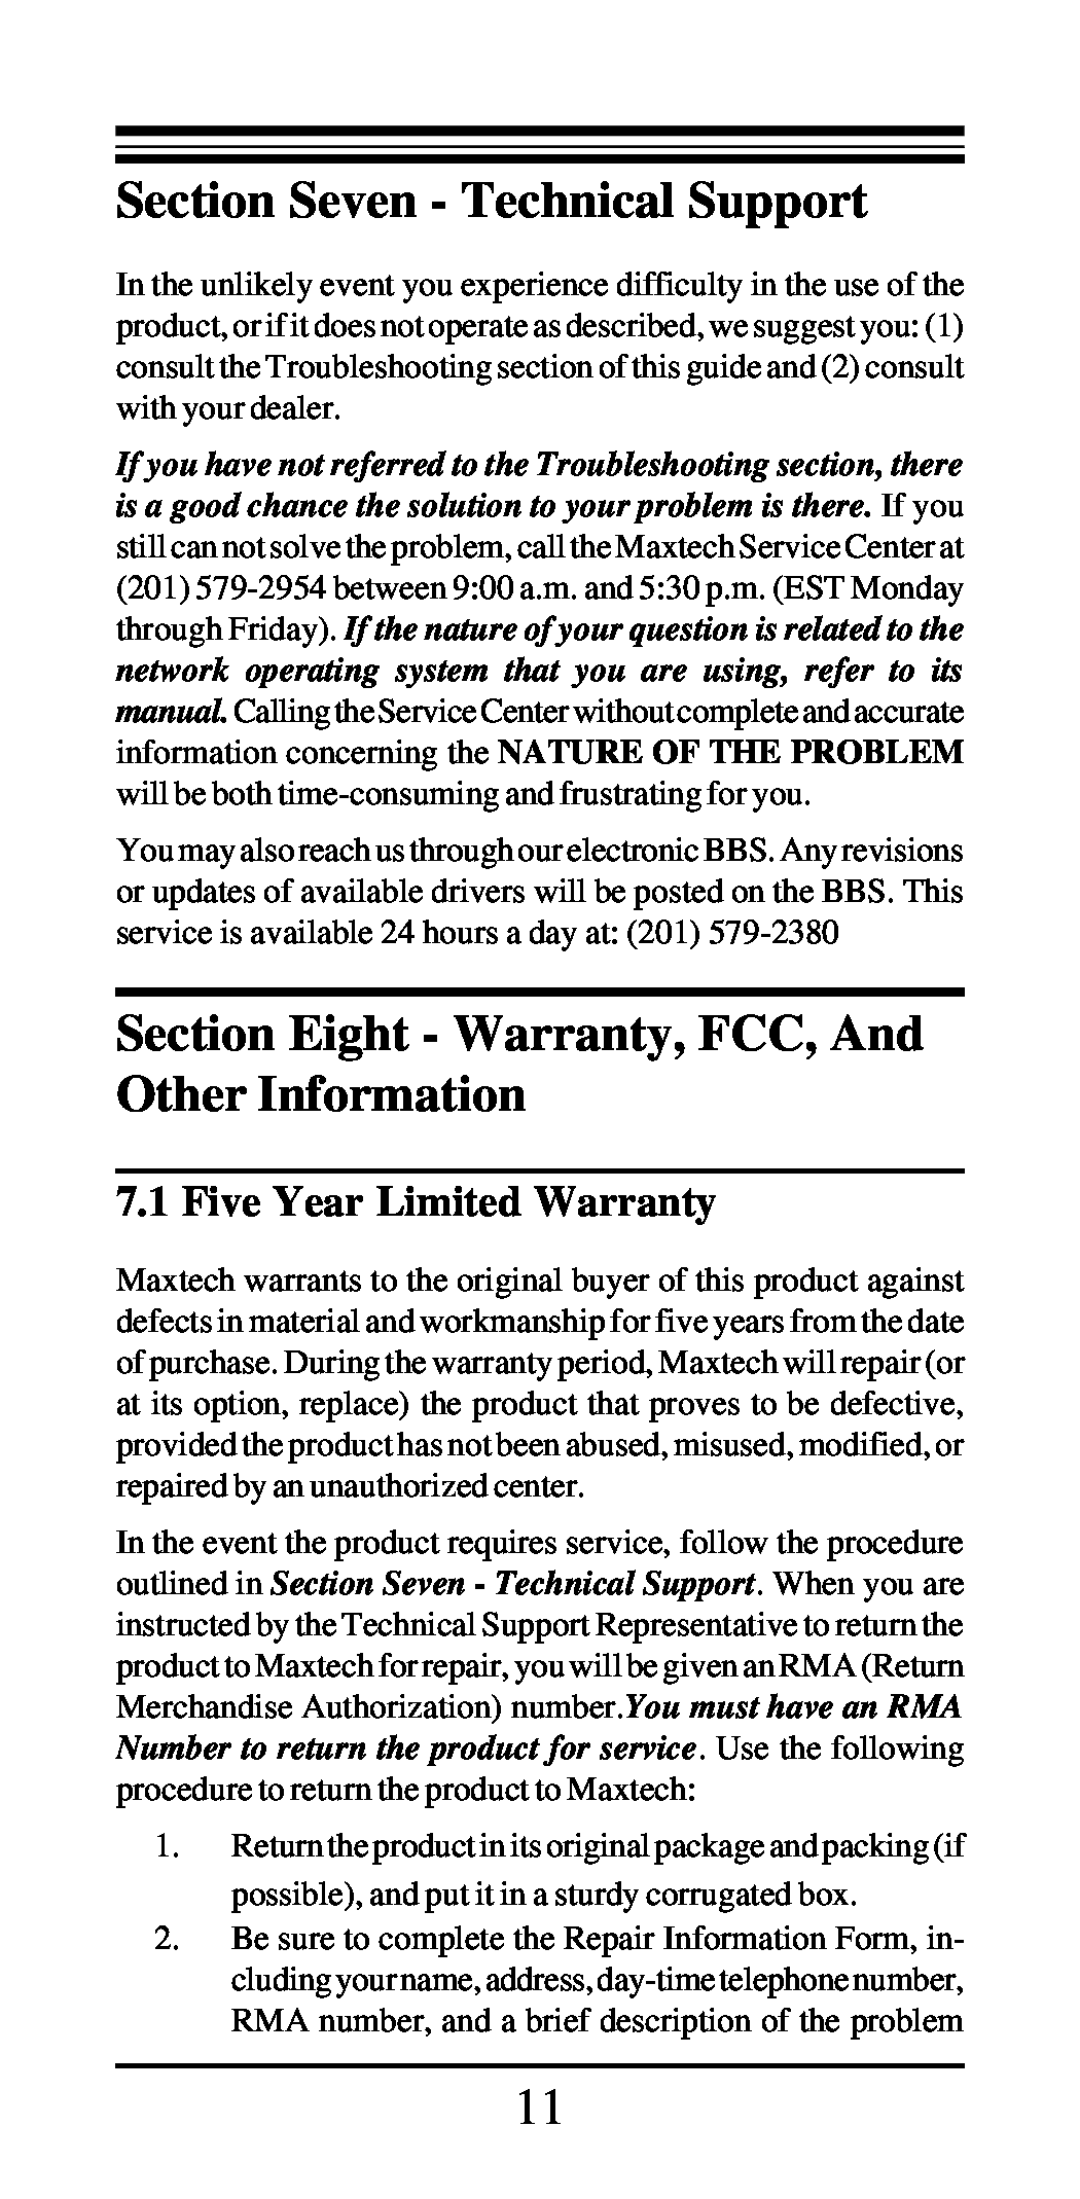 MaxTech NX-16 manual Section Seven - Technical Support, Section Eight - Warranty, FCC, And Other Information 